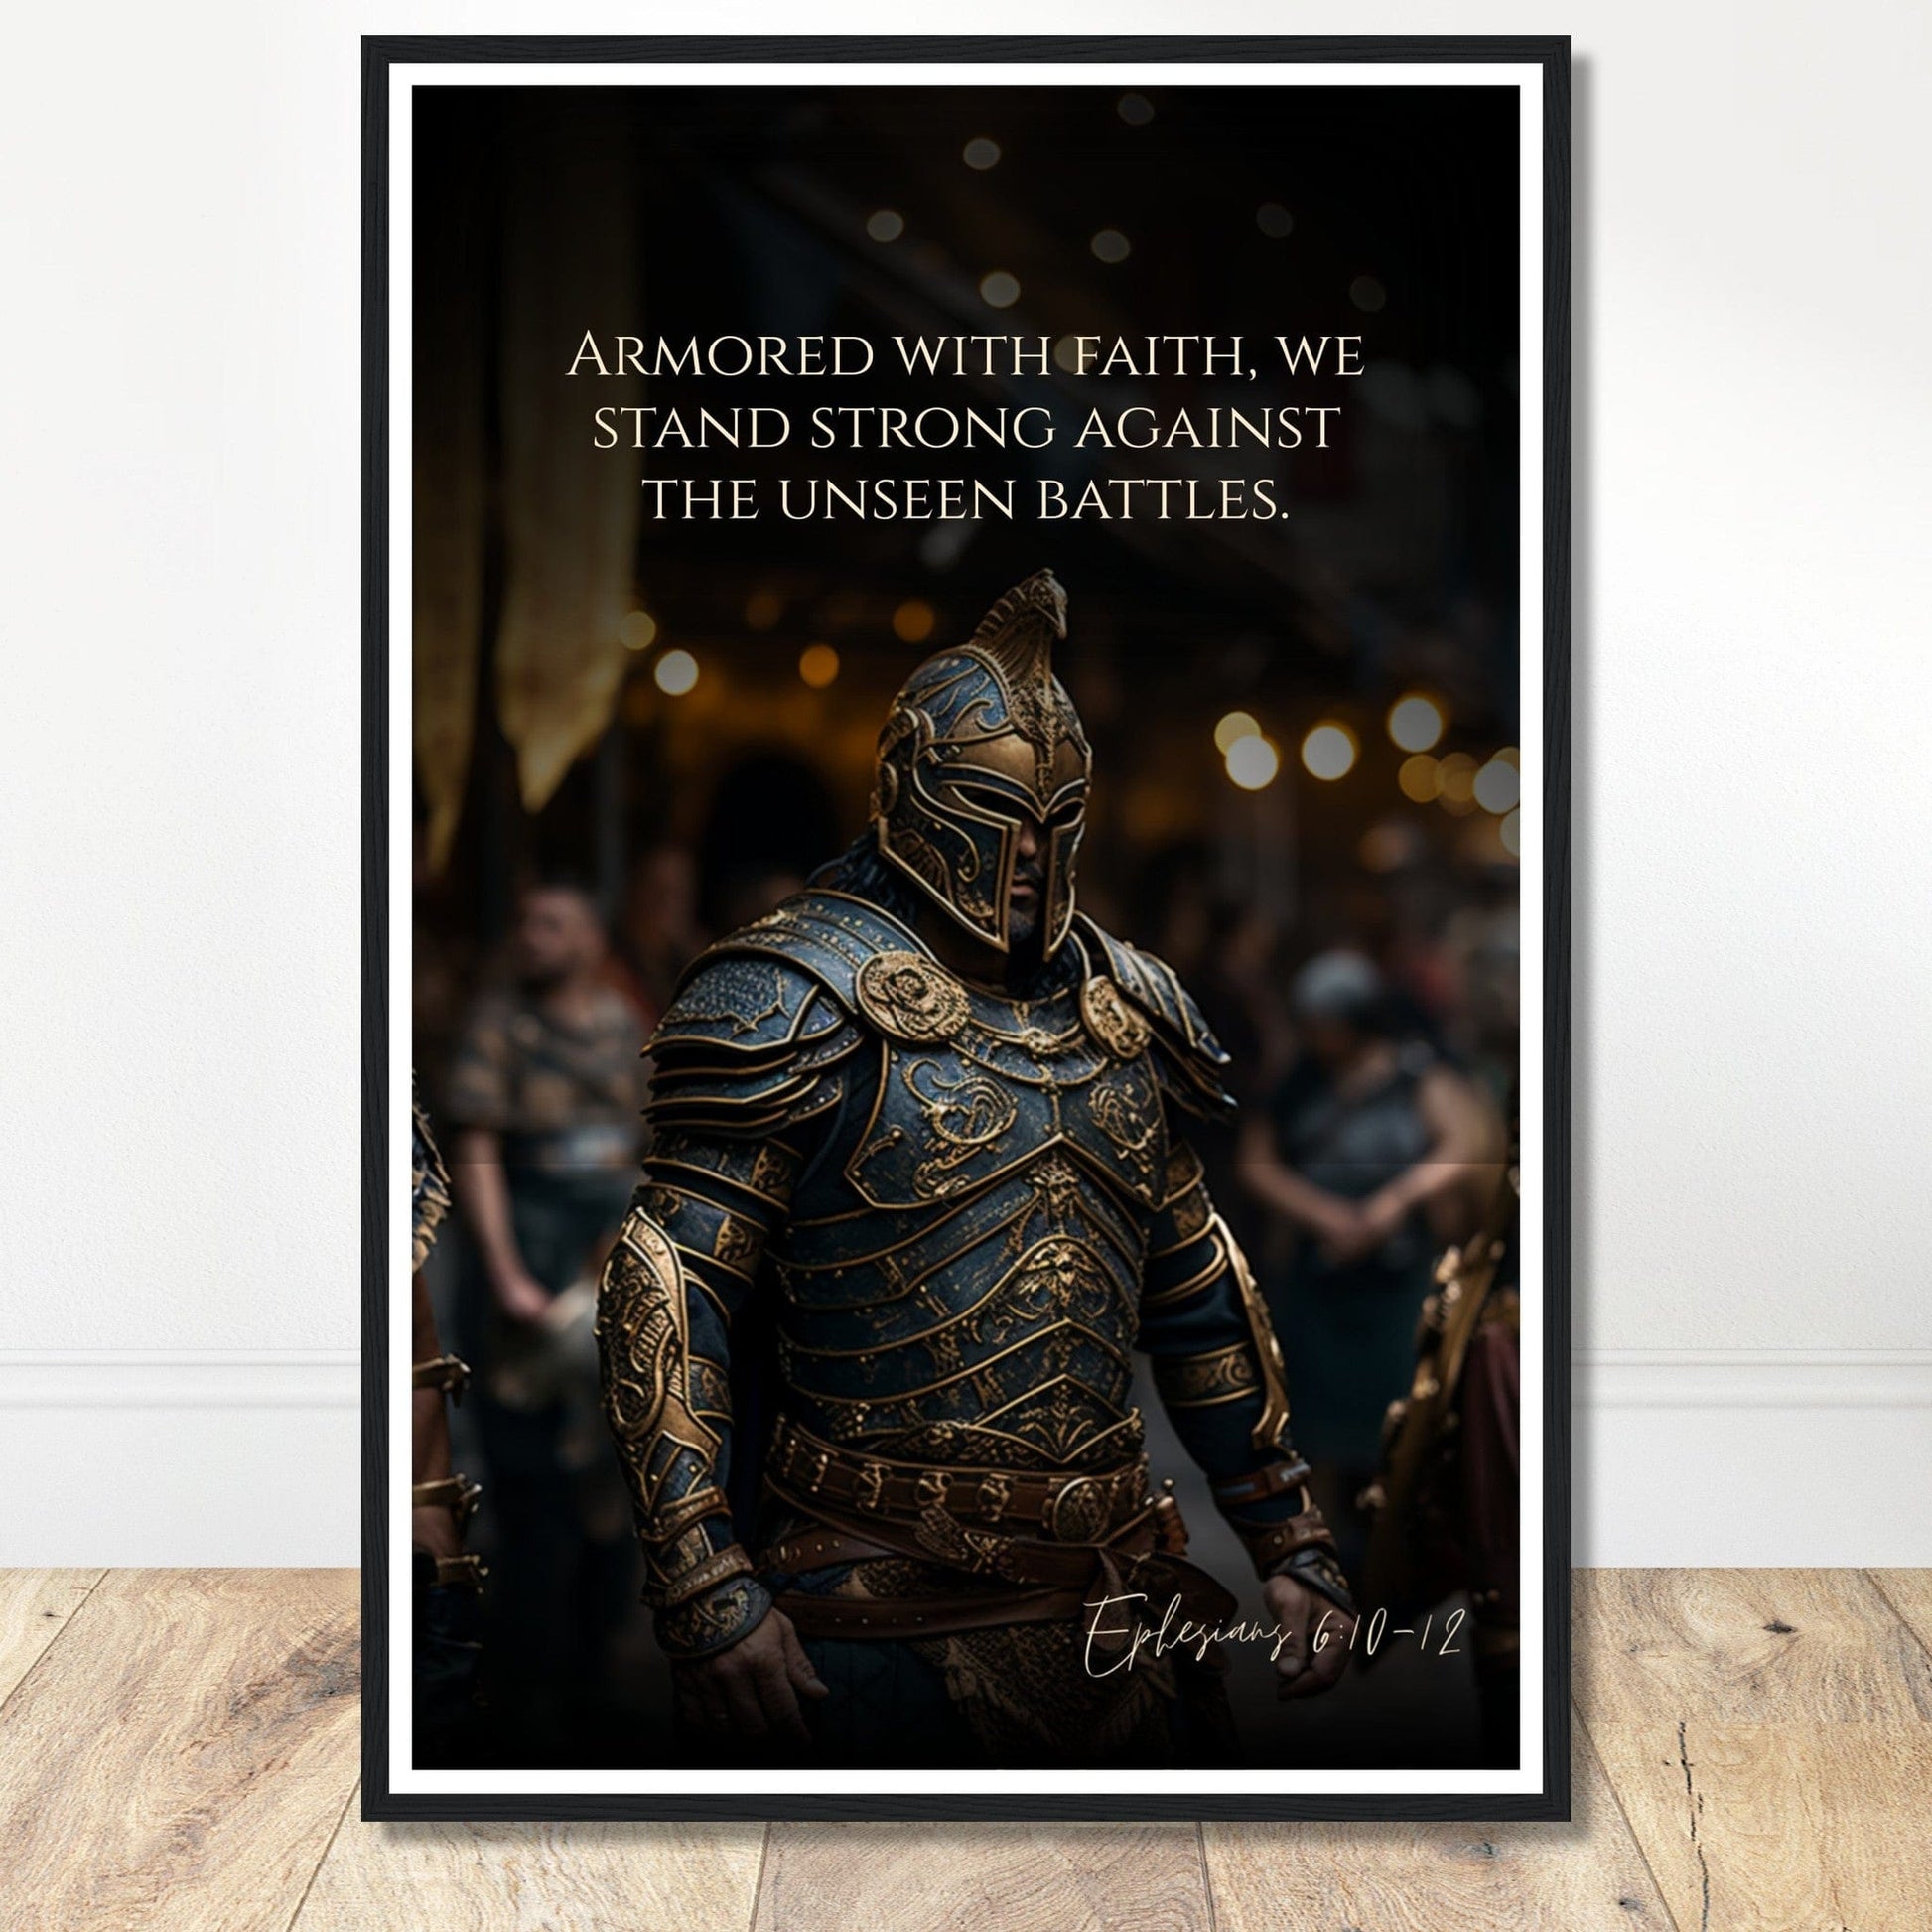 Coffee With My Father Print Material 60x90 cm / 24x36″ / Premium Matte Paper Wooden Framed Poster / Black frame The Unseen Battles: Ephesians 6:10-12 - Artwork